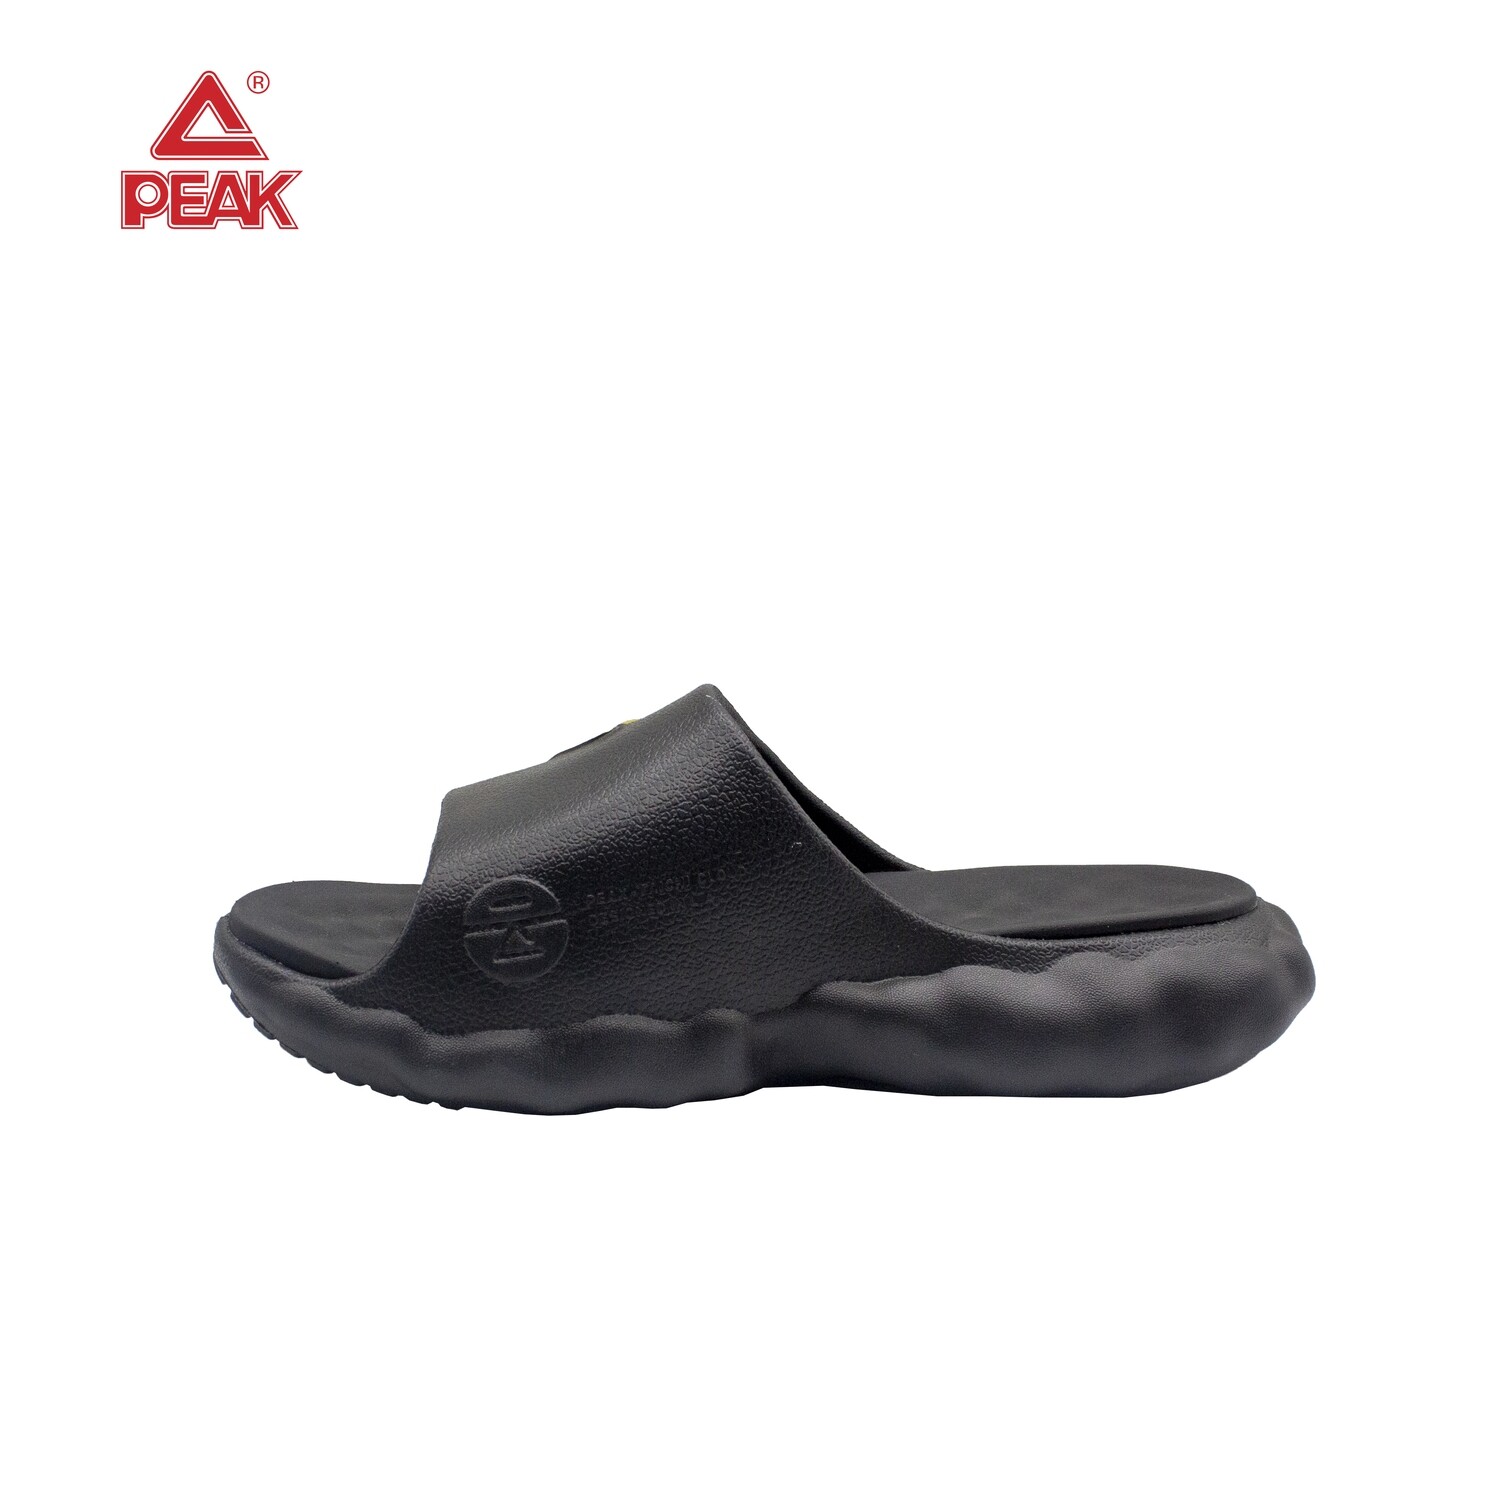 Peak Taichi Slides For Women Brazil Slide Slipper - Non-slip House Slippers  For Indoor And Outdoor Use - Waterproof, Quick-dryin - Beach & Outdoor  Sandals - AliExpress